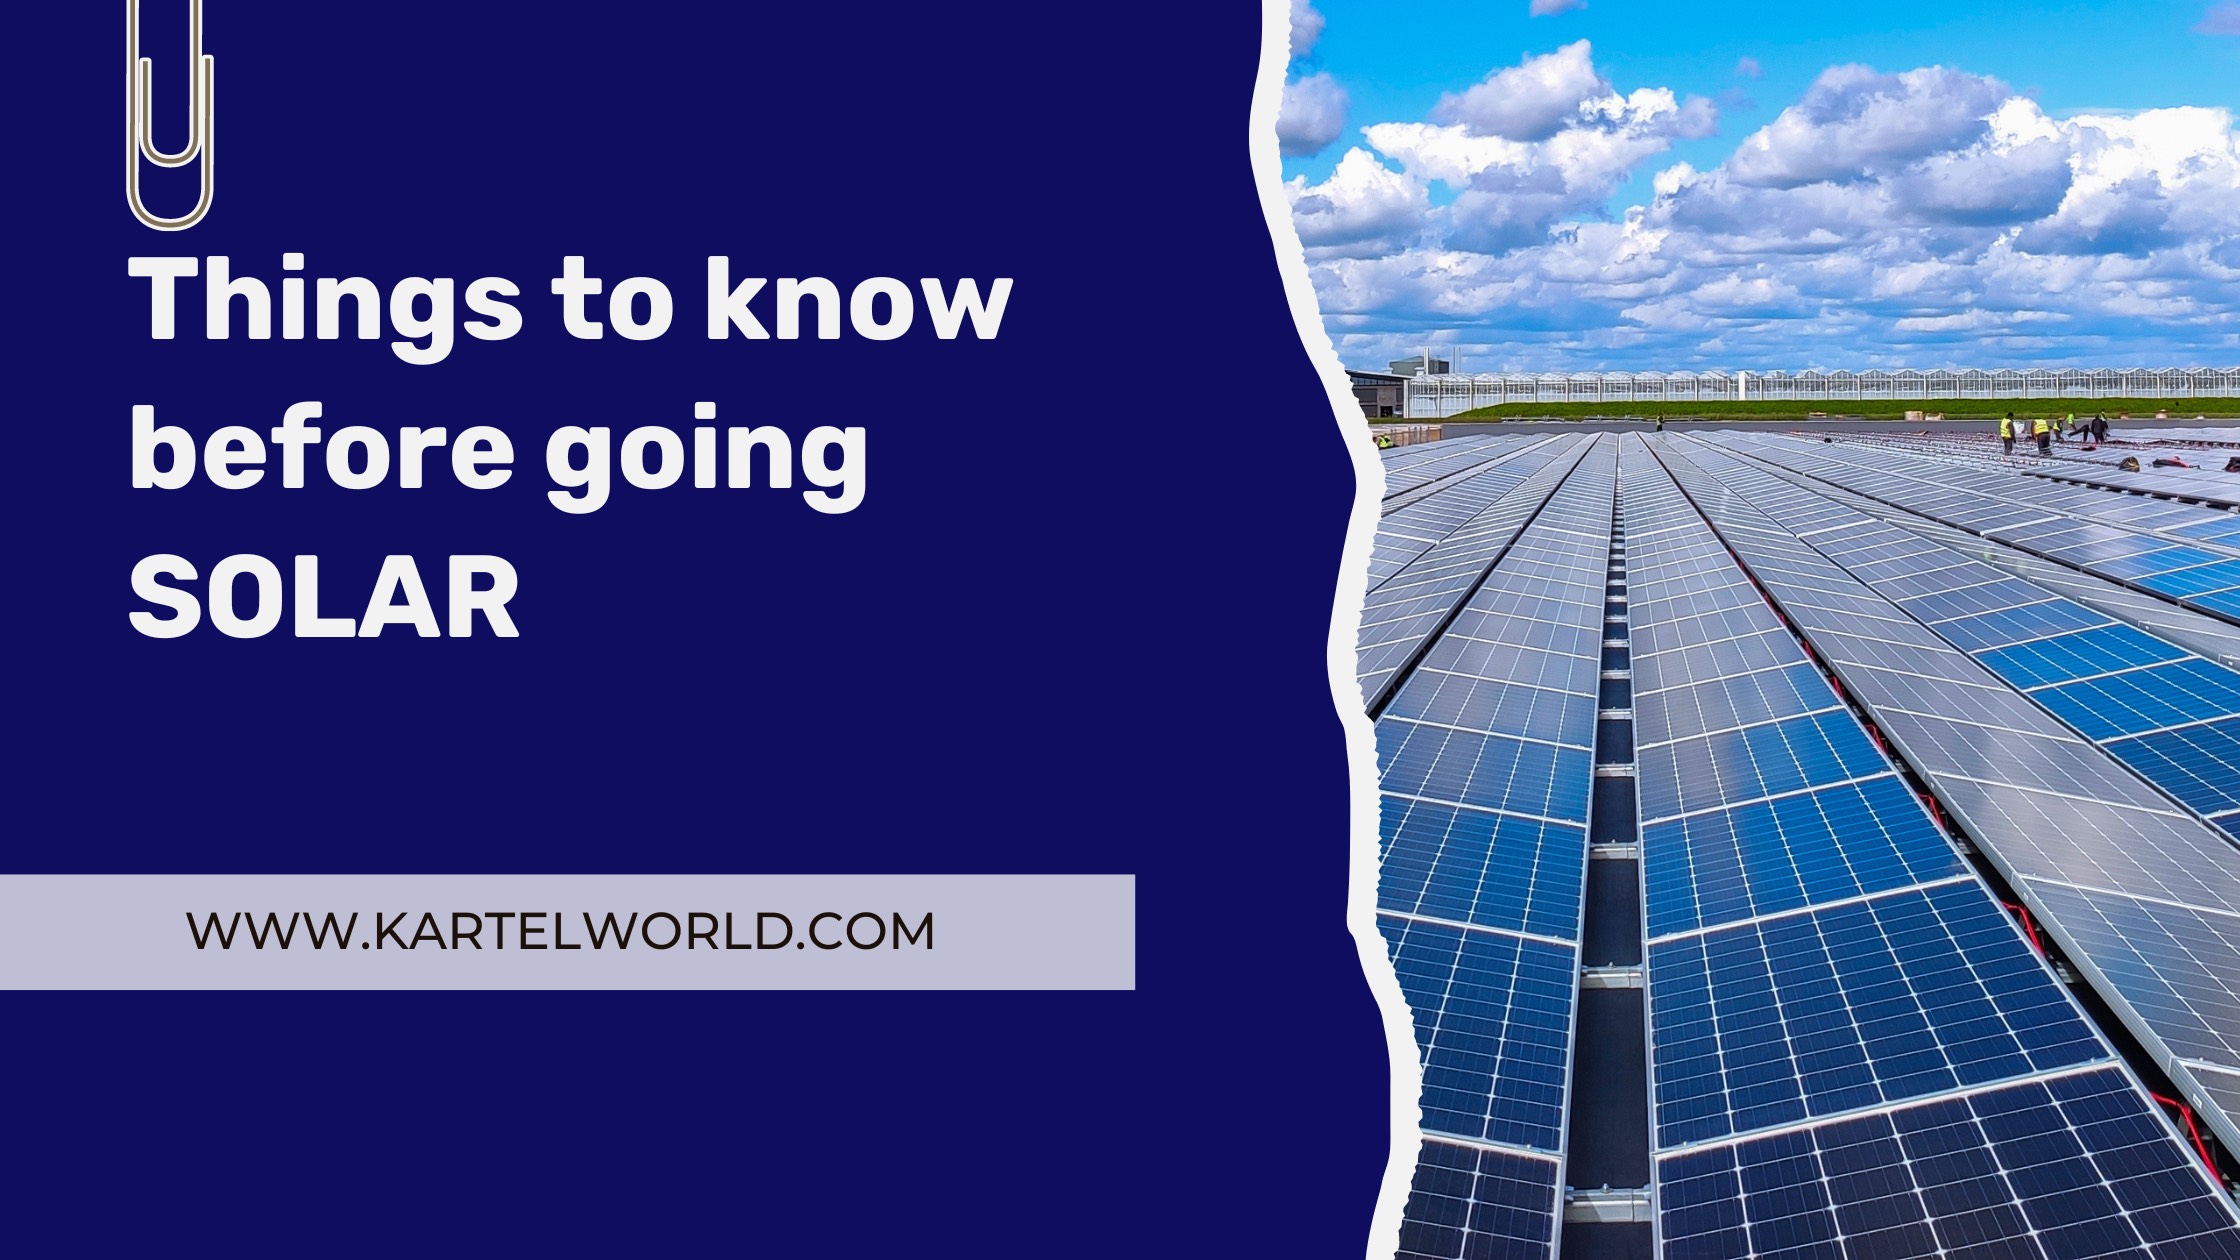 Kartel World or Sygnite Solar: Which is the better option?